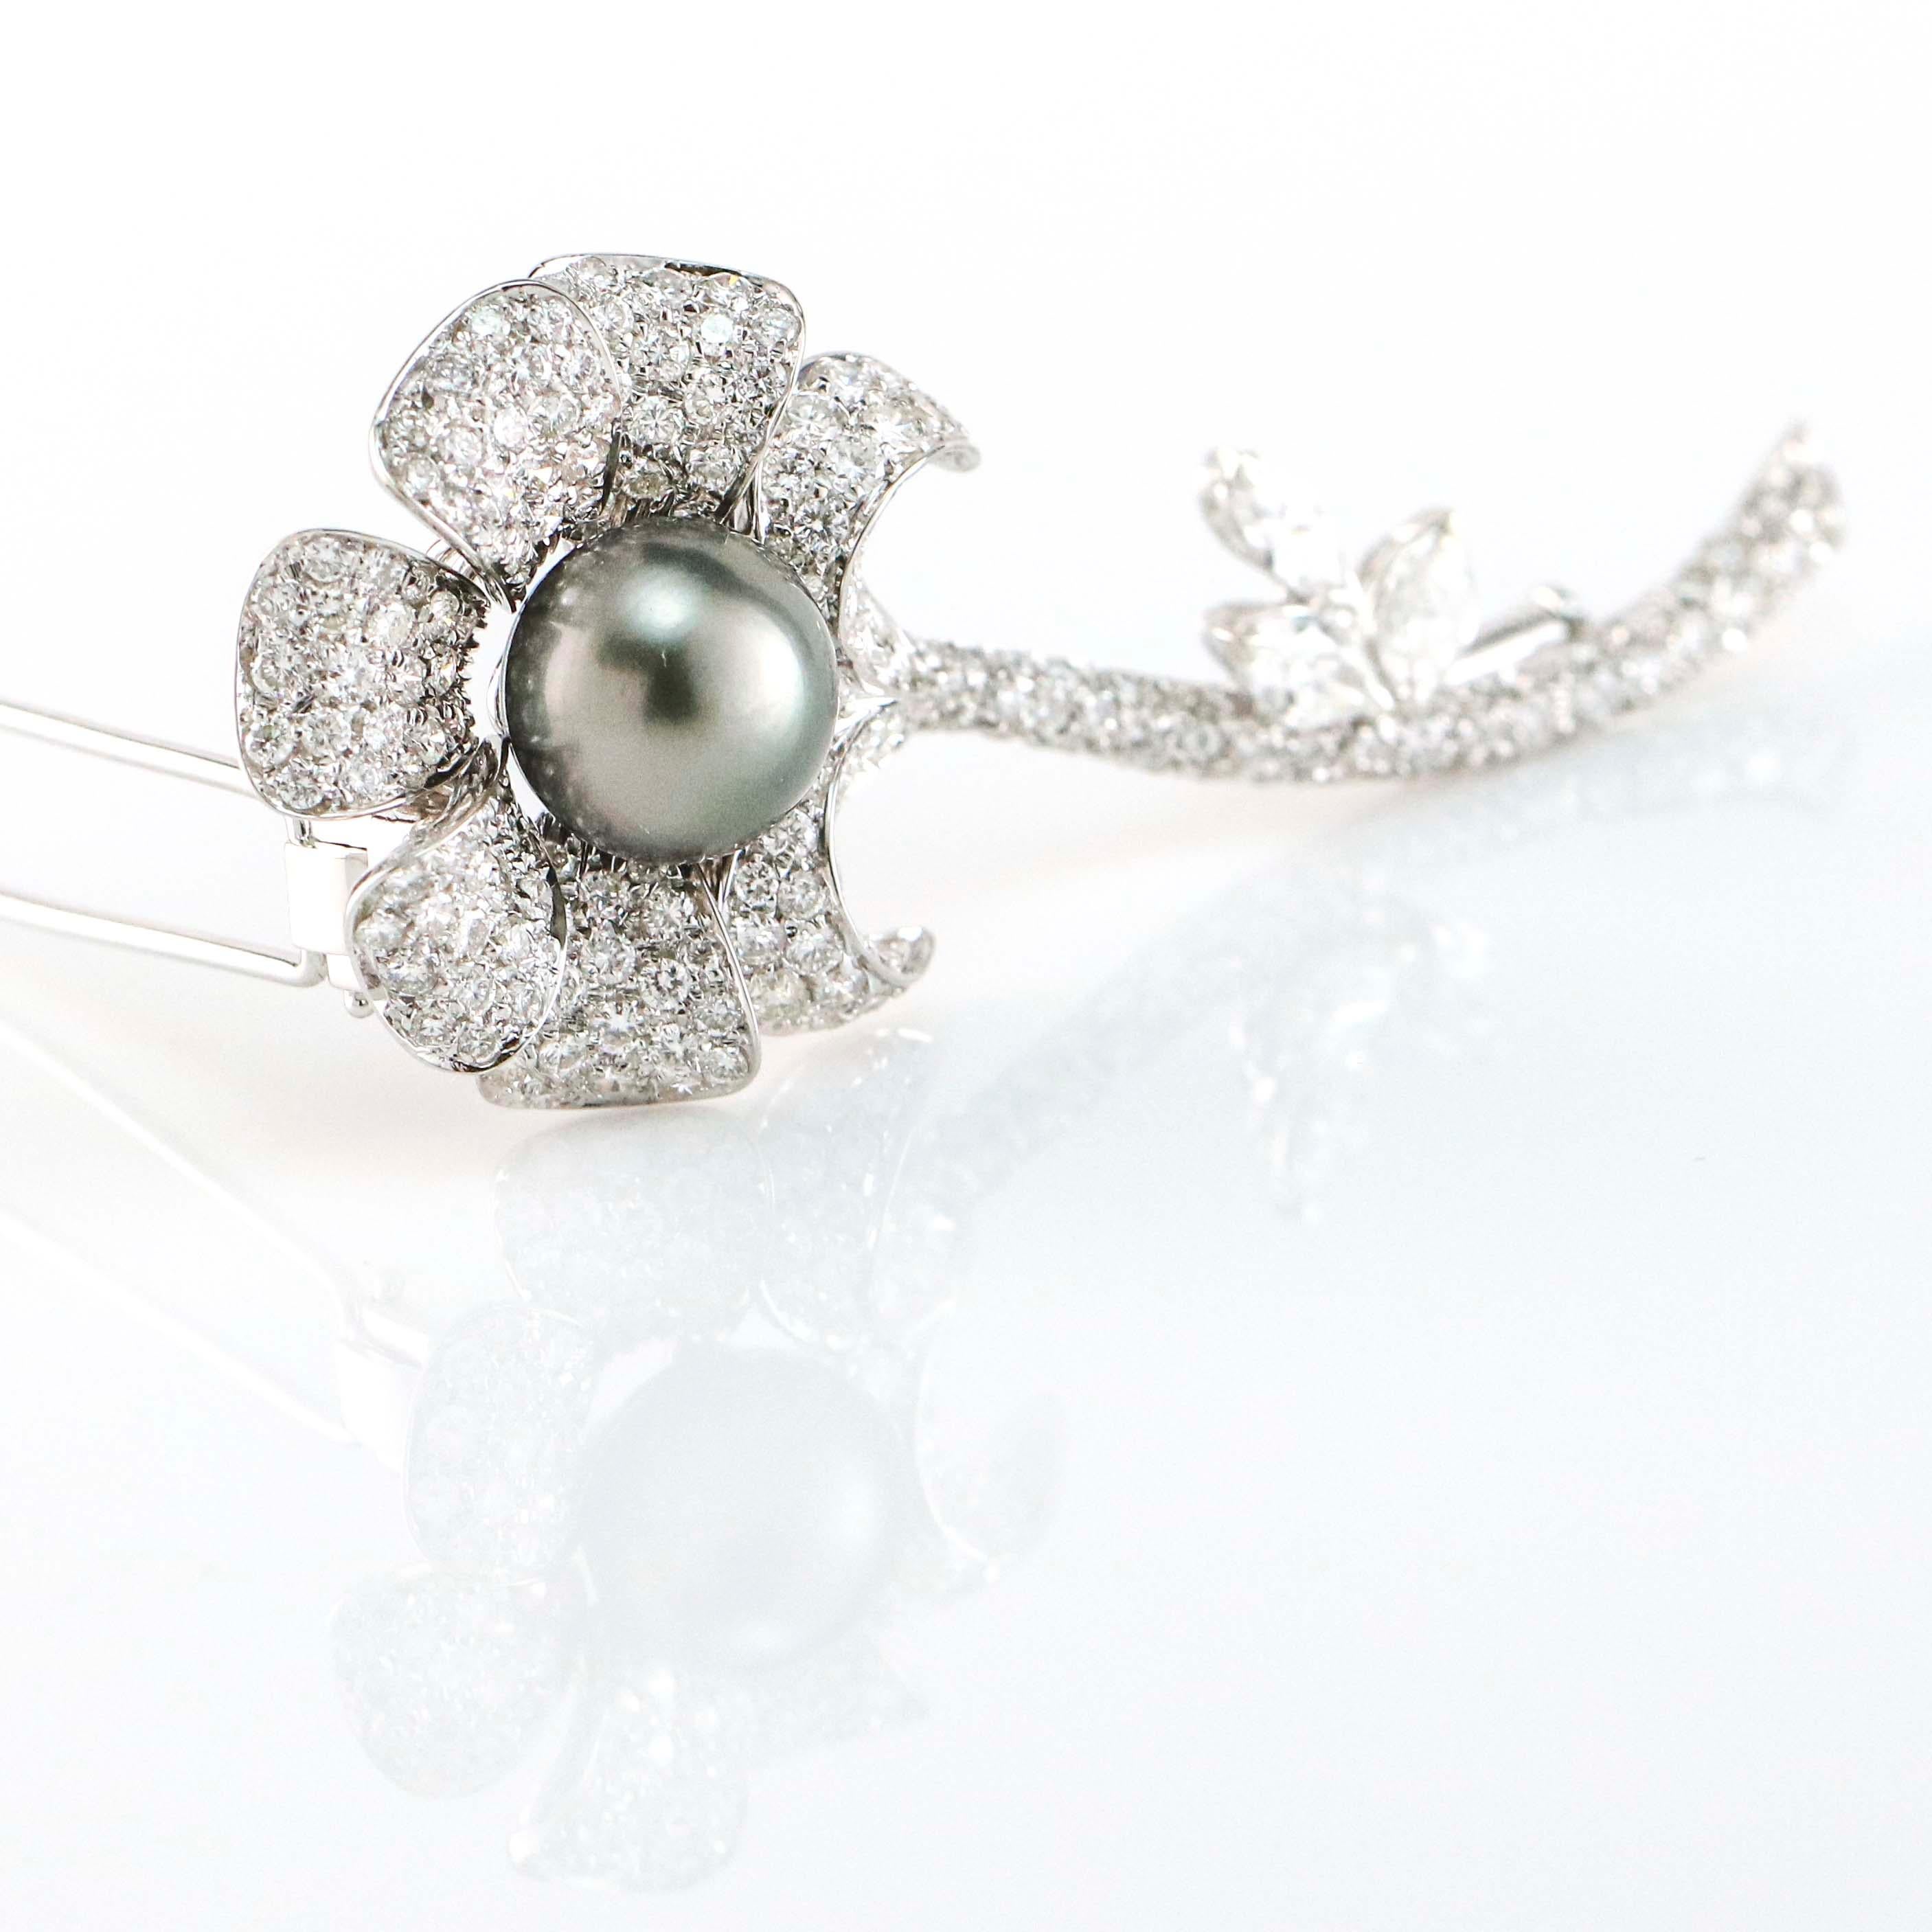 Flower brooch with double pinstem and trombone catch on the back. The long stem flower embellished with 220 round cut diamonds, at the center of the flower an 11mm Tahitian pearl. Signed 2243 AL. Diamonds,  H-I VS-SI.